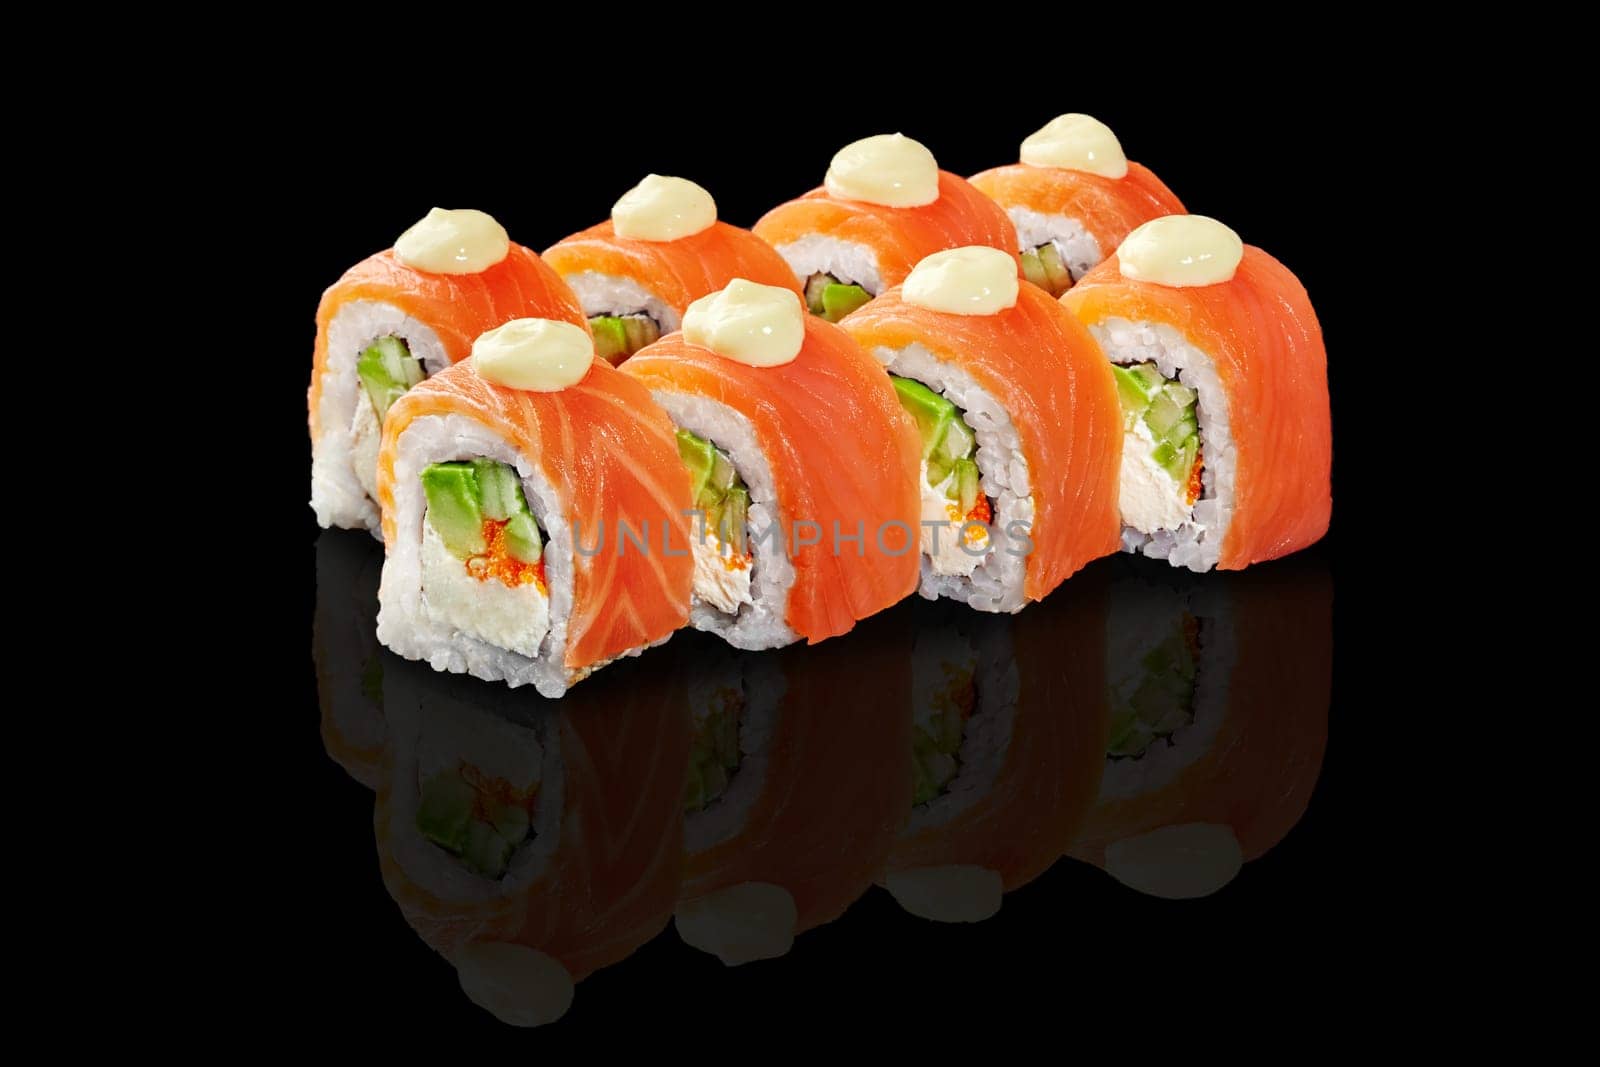 Classic Japanese sushi rolls filled with avocado, tobiko and cream cheese topped with fresh salmon slices and drops of mayo, presented on glossy reflective black background